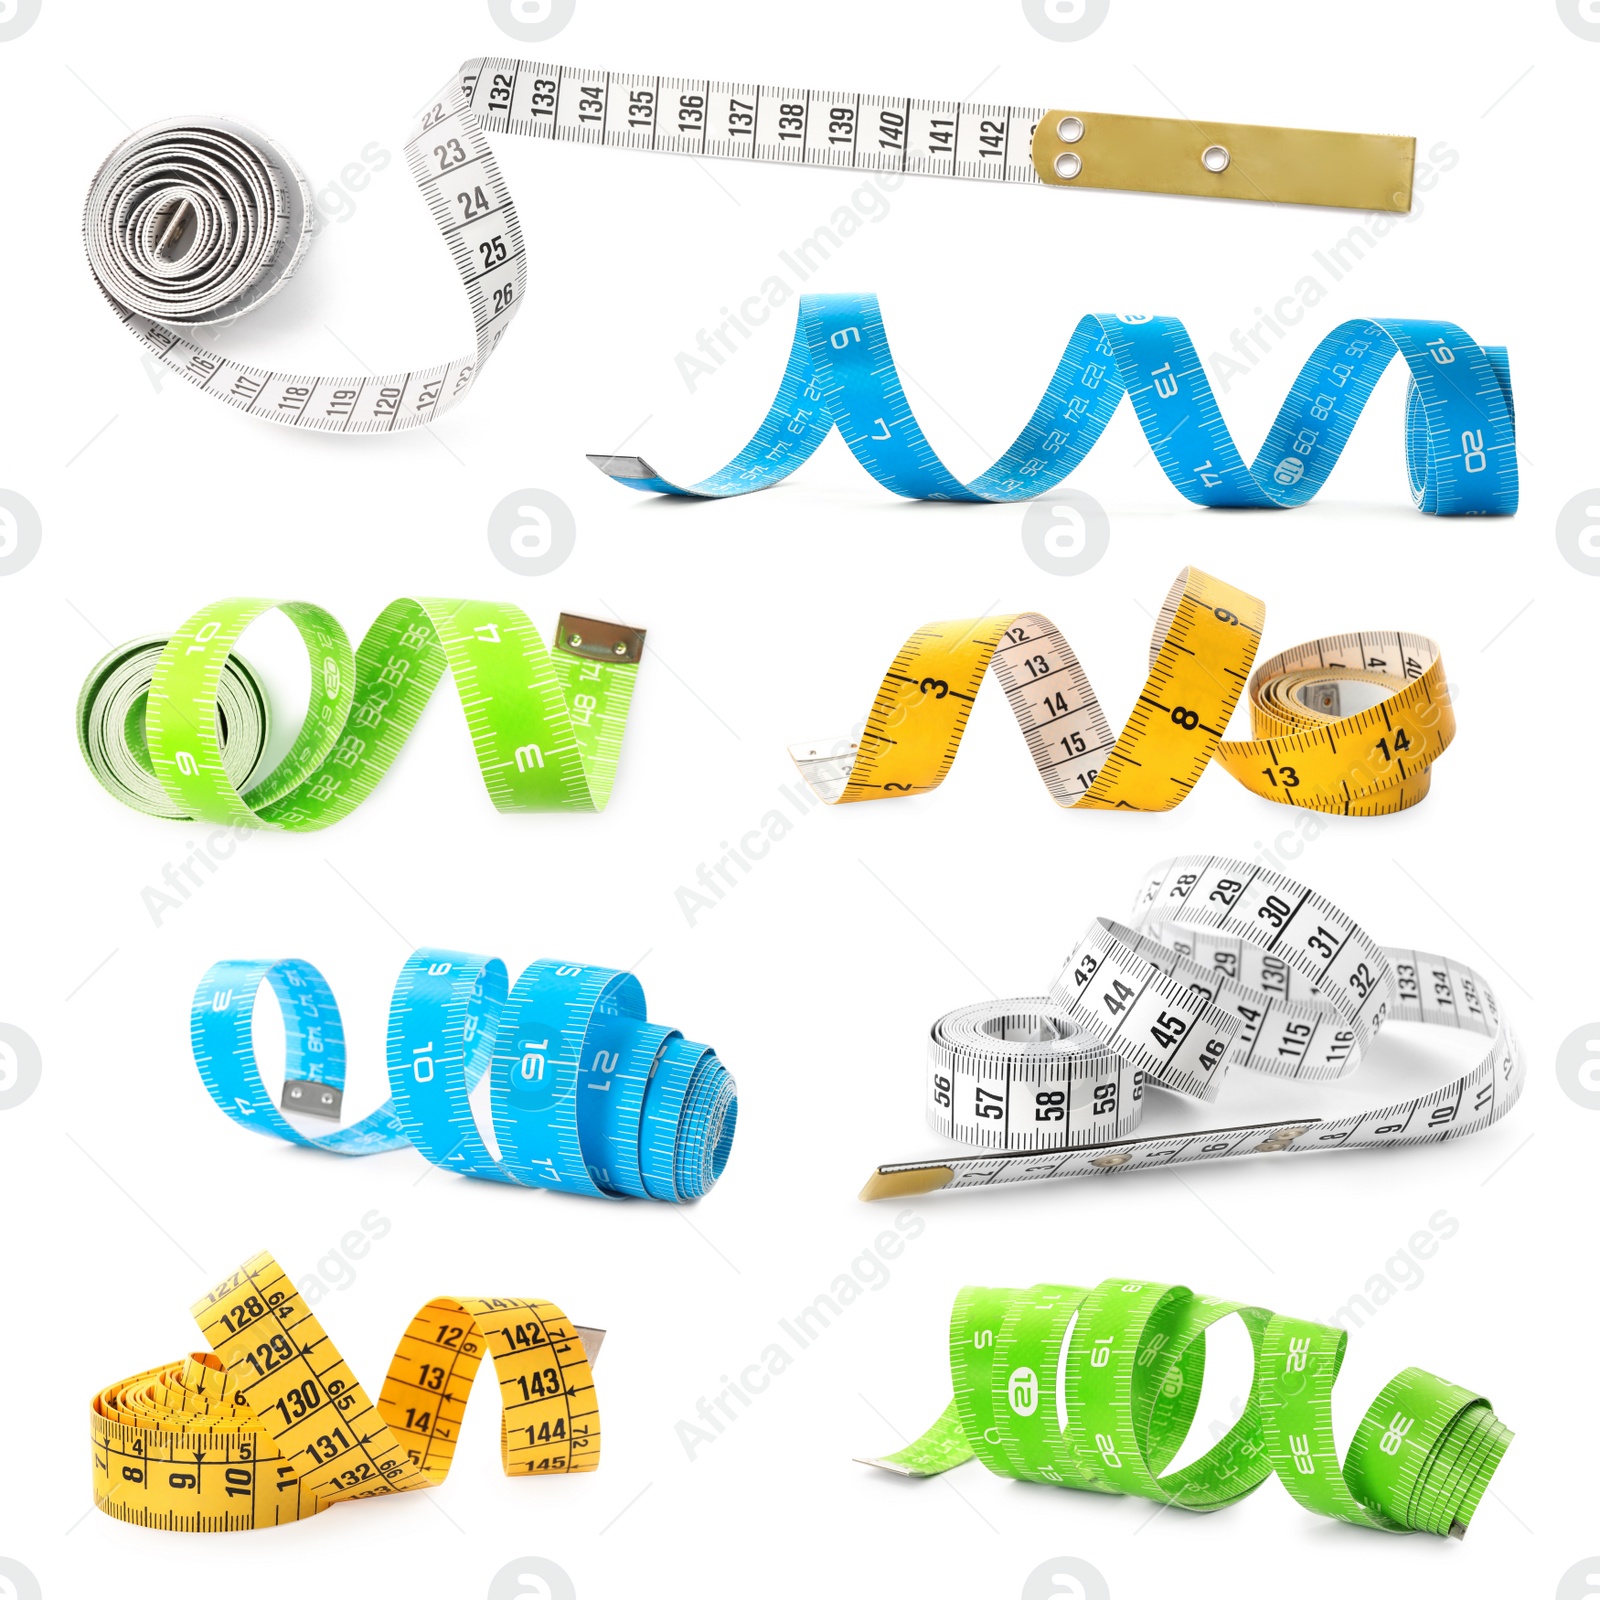 Image of Set with different measuring tapes on white background